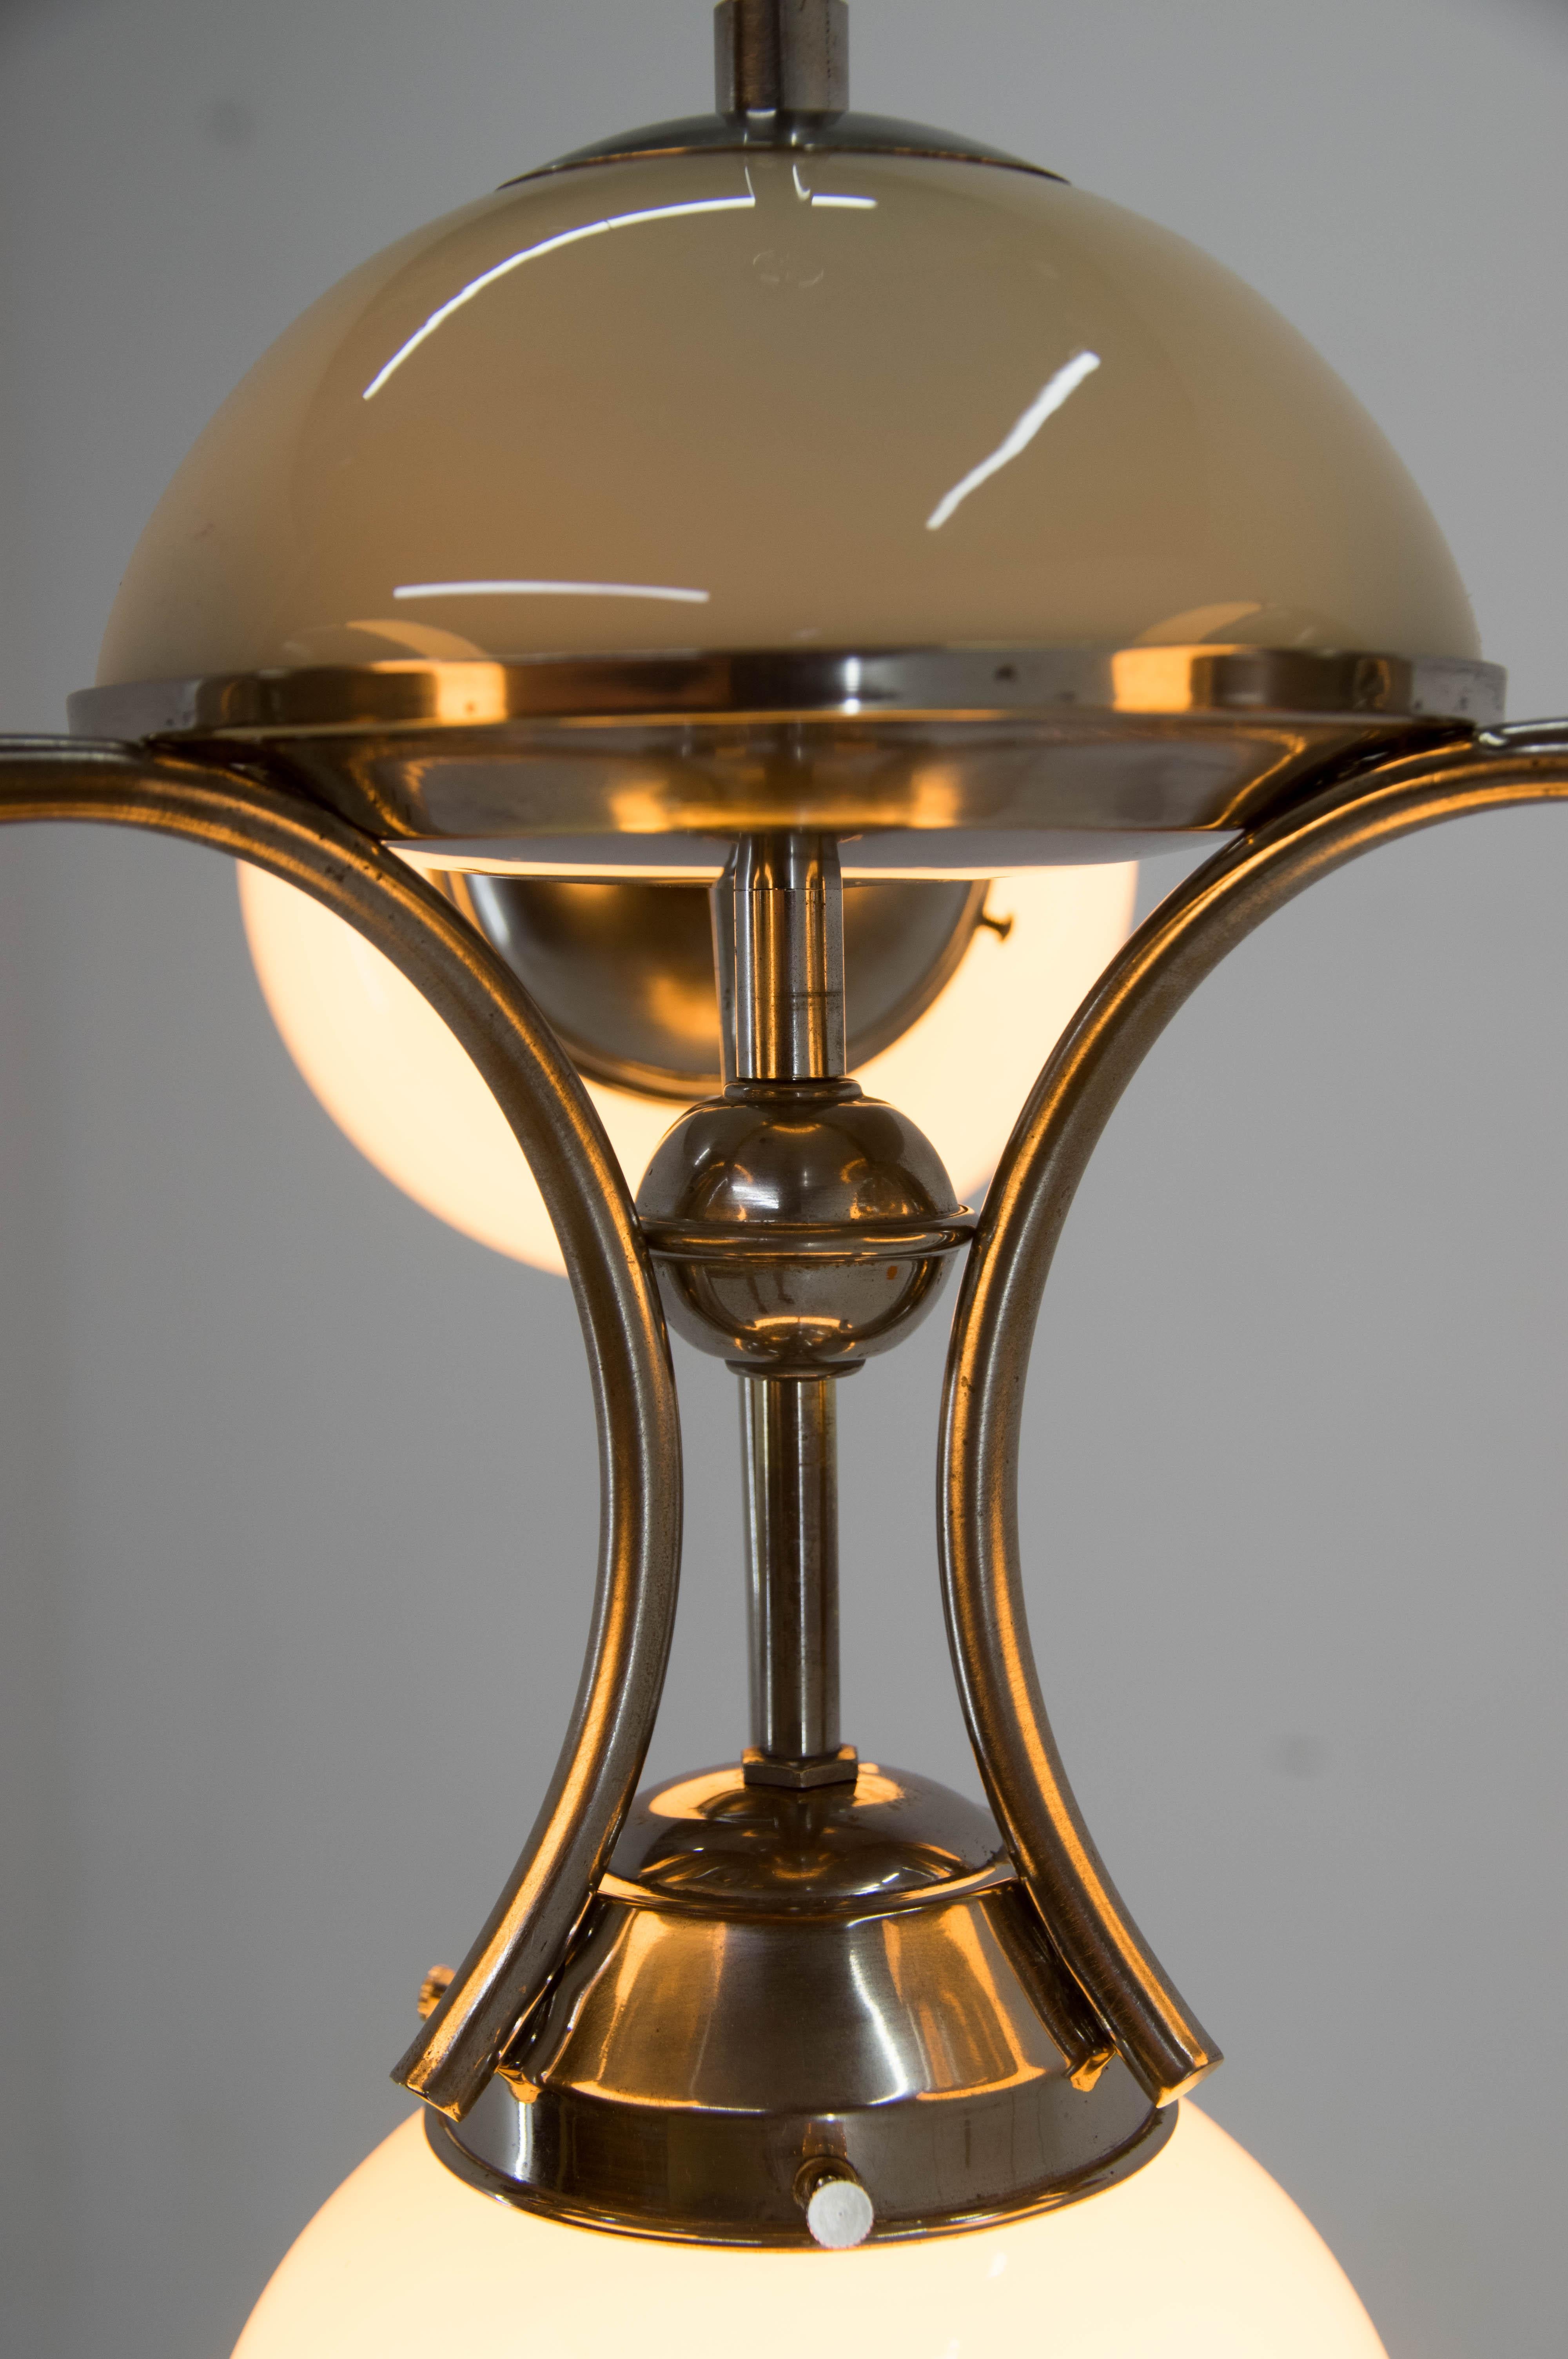 Unique Art Deco Nickel and Glass Chandelier, 1930s For Sale 1